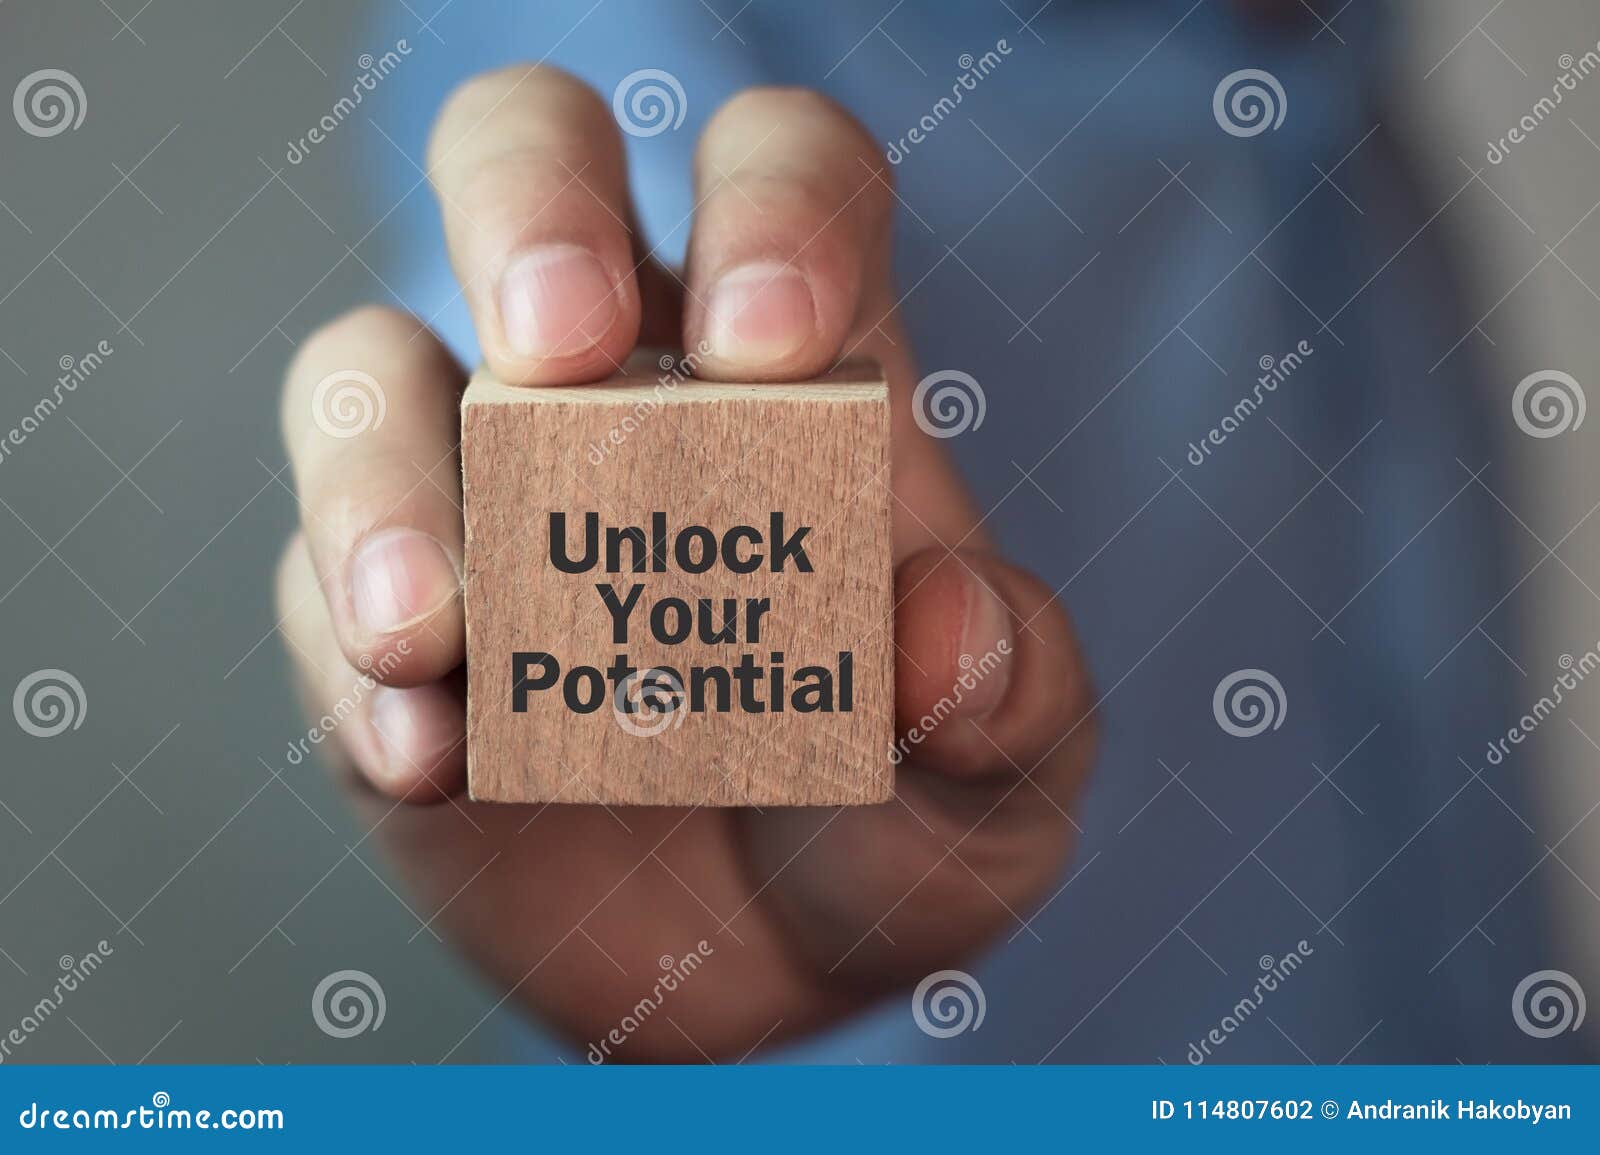 Unlock Your Potential: 4 Animated Keys to Personal Growth in the Year Ahead 2